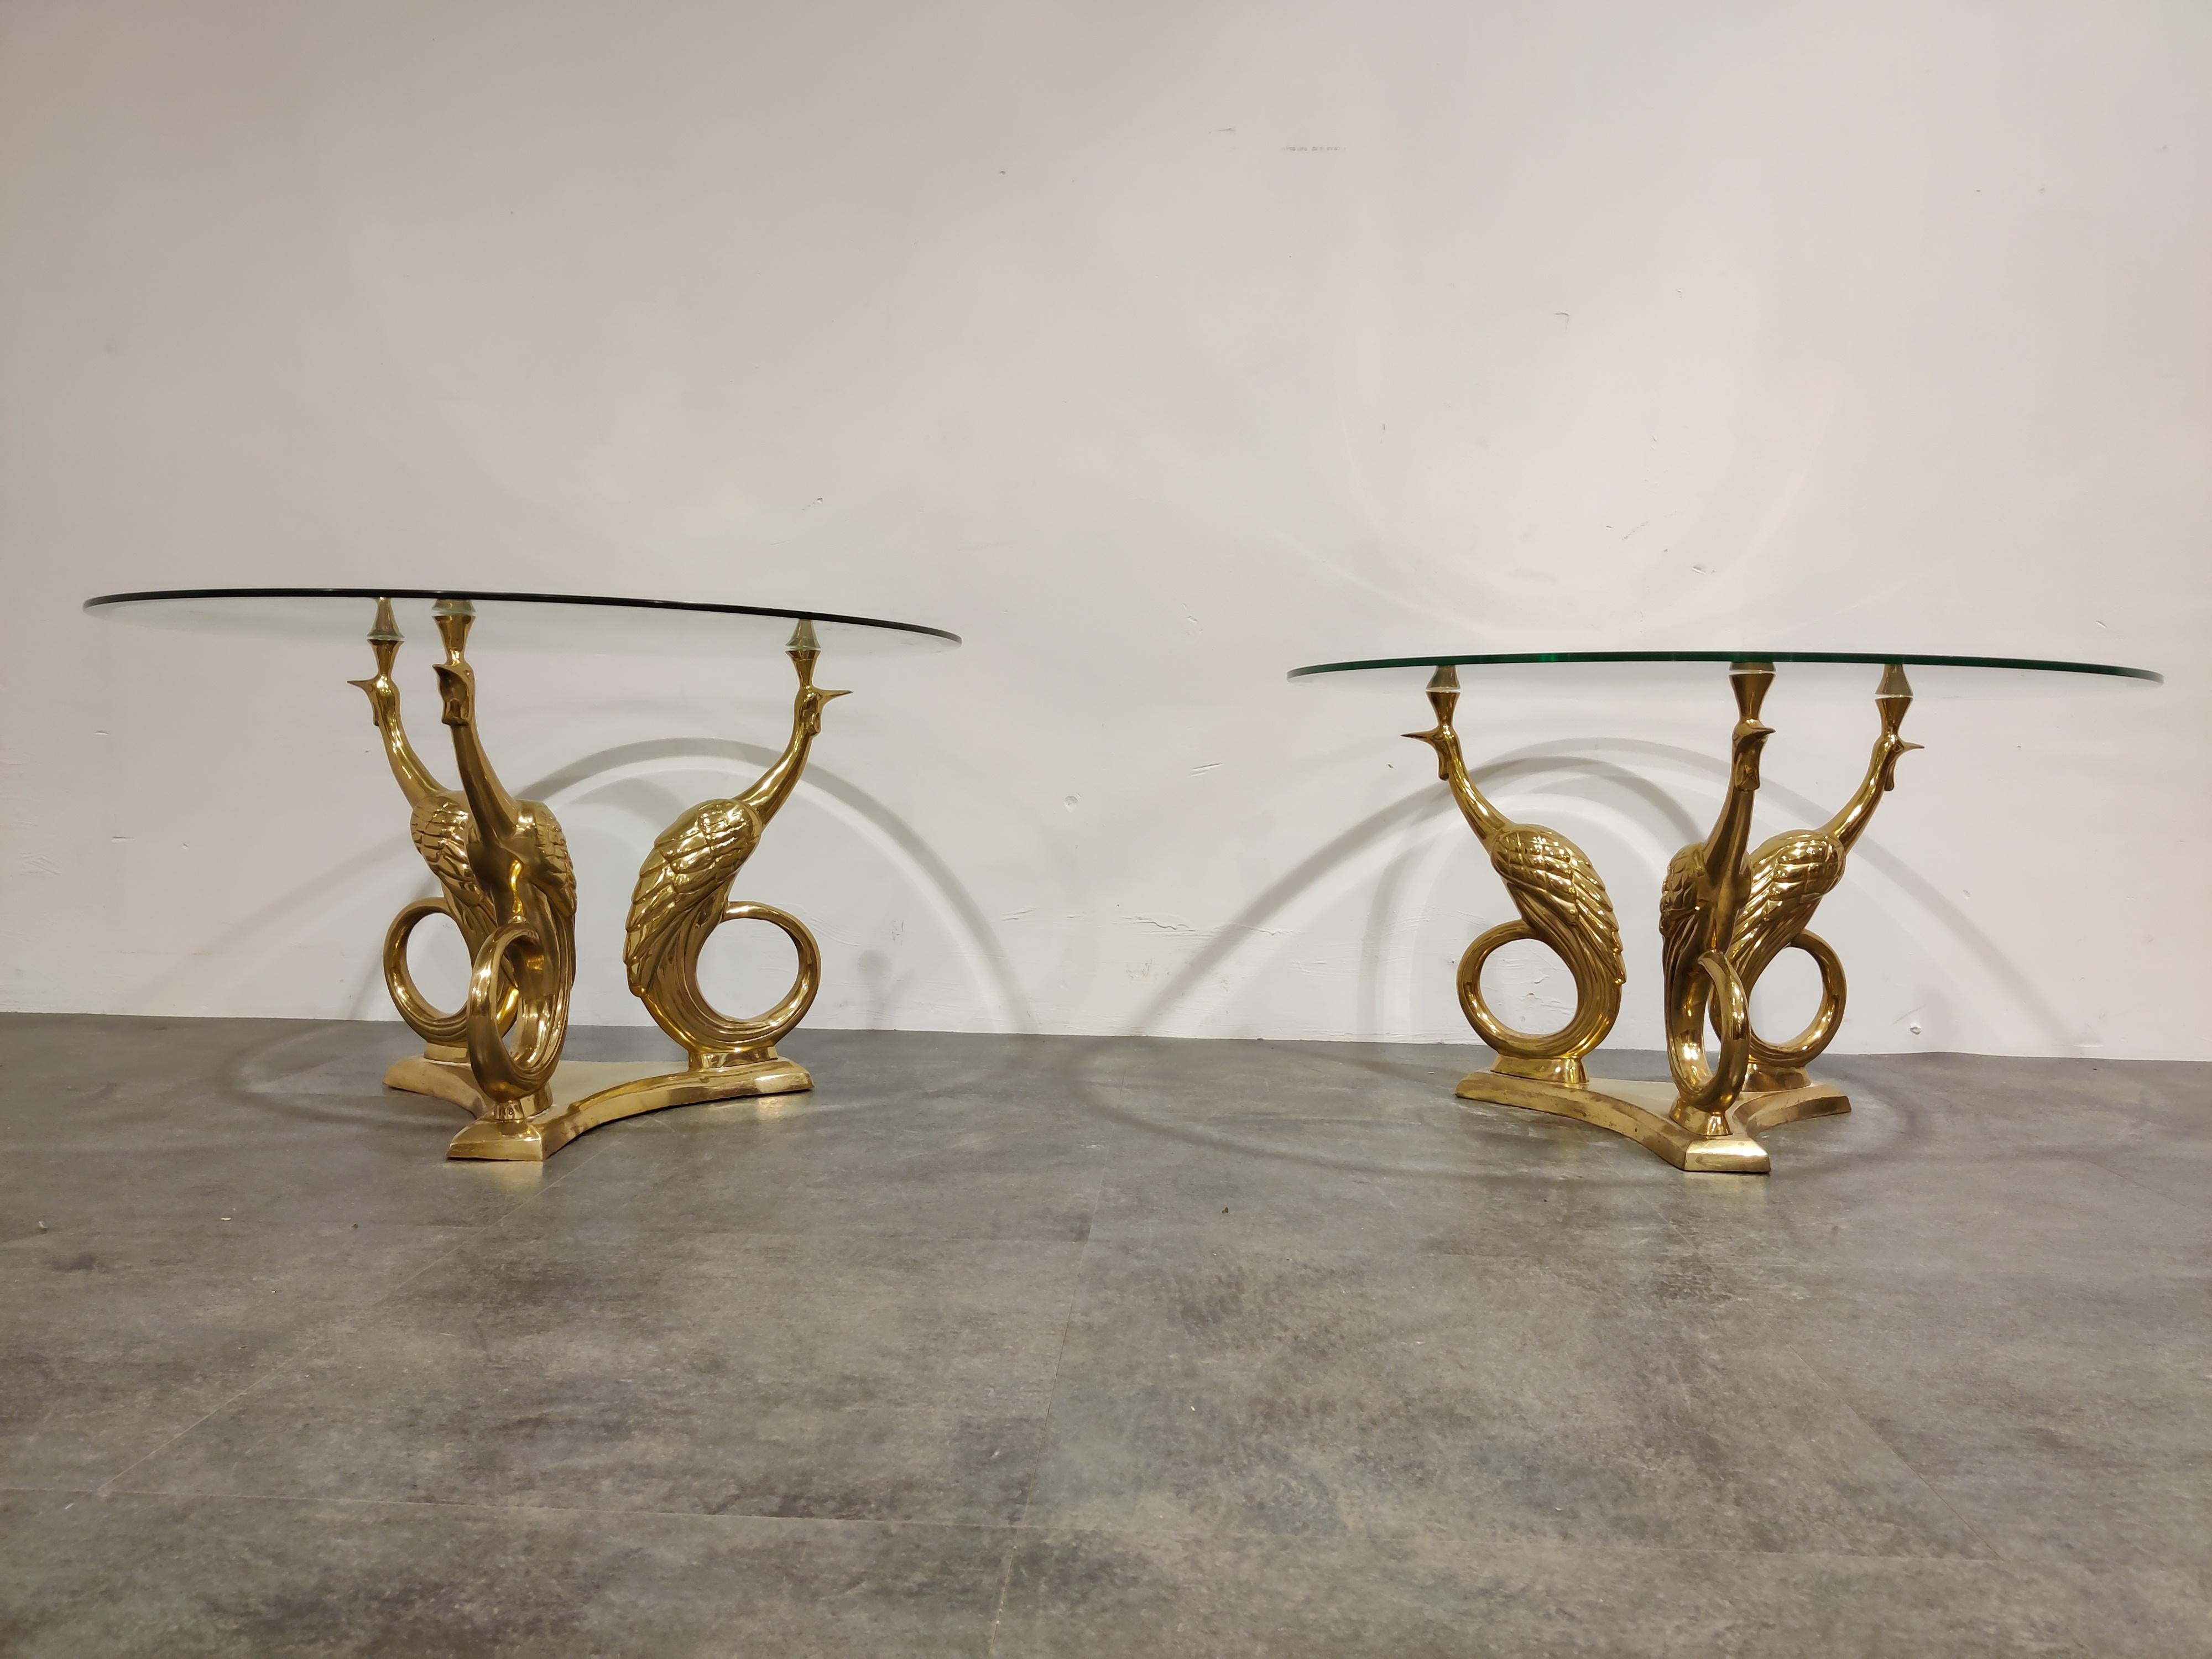 Sculptural brass peacock coffee or side tables with a clear round glass top.

Great eye catching coffee table.

1970s - Belgium

Good overall condition.

Dimensions:
Height: 50cm/19.68